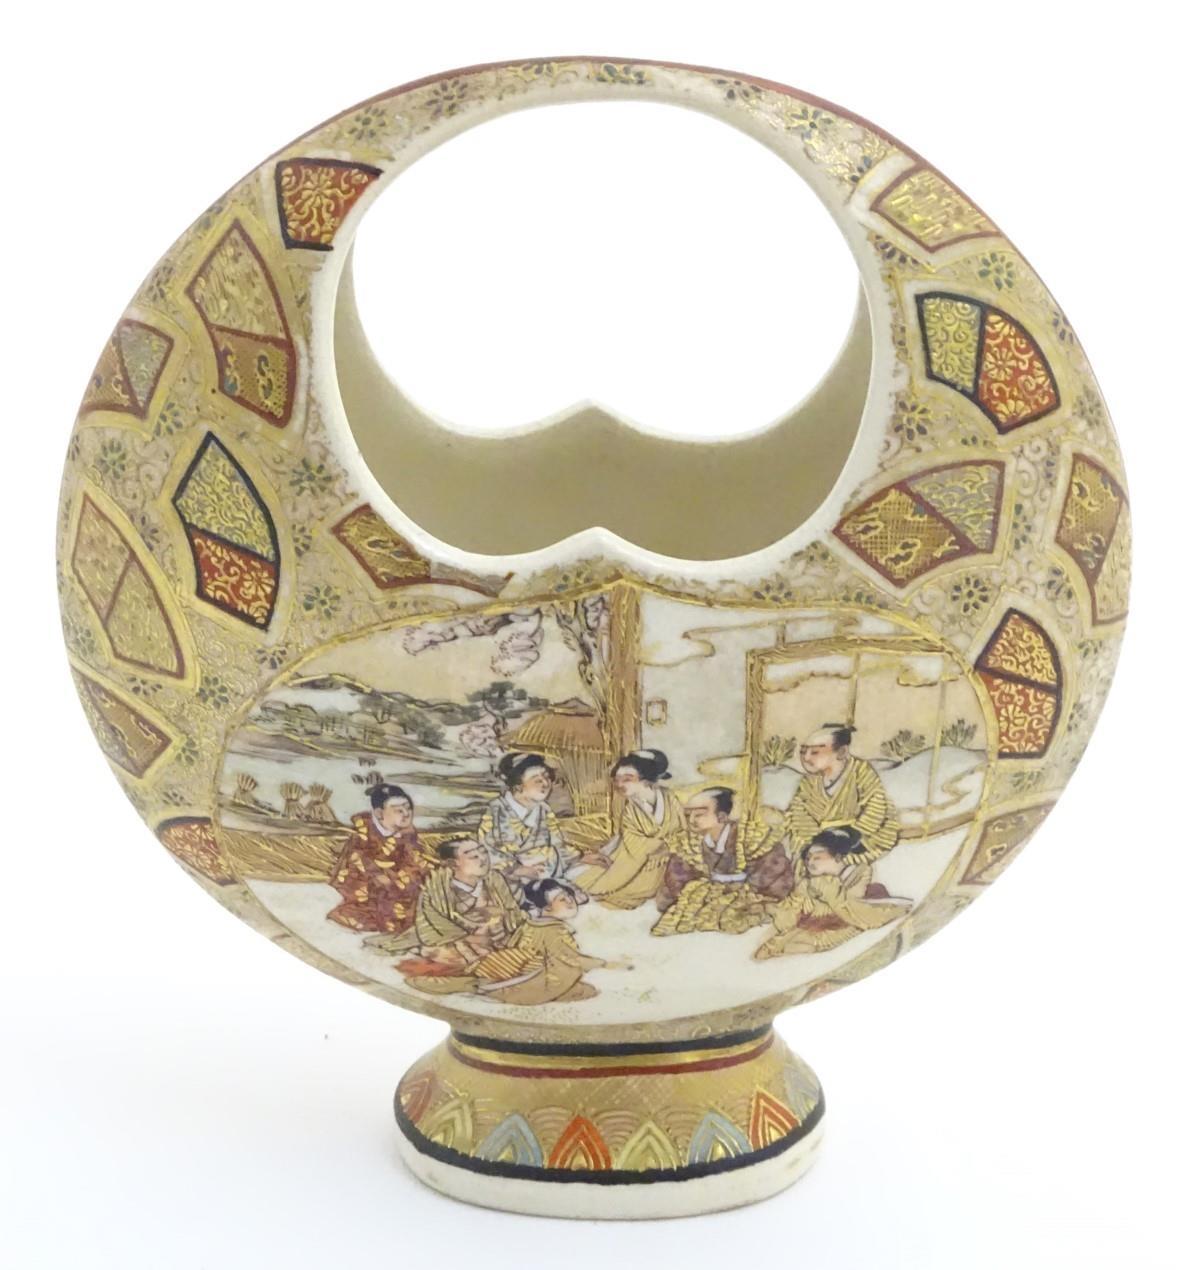 A Japanese satsuma moon basket vase with hand painted decoration depicting figures seated around - Image 6 of 7